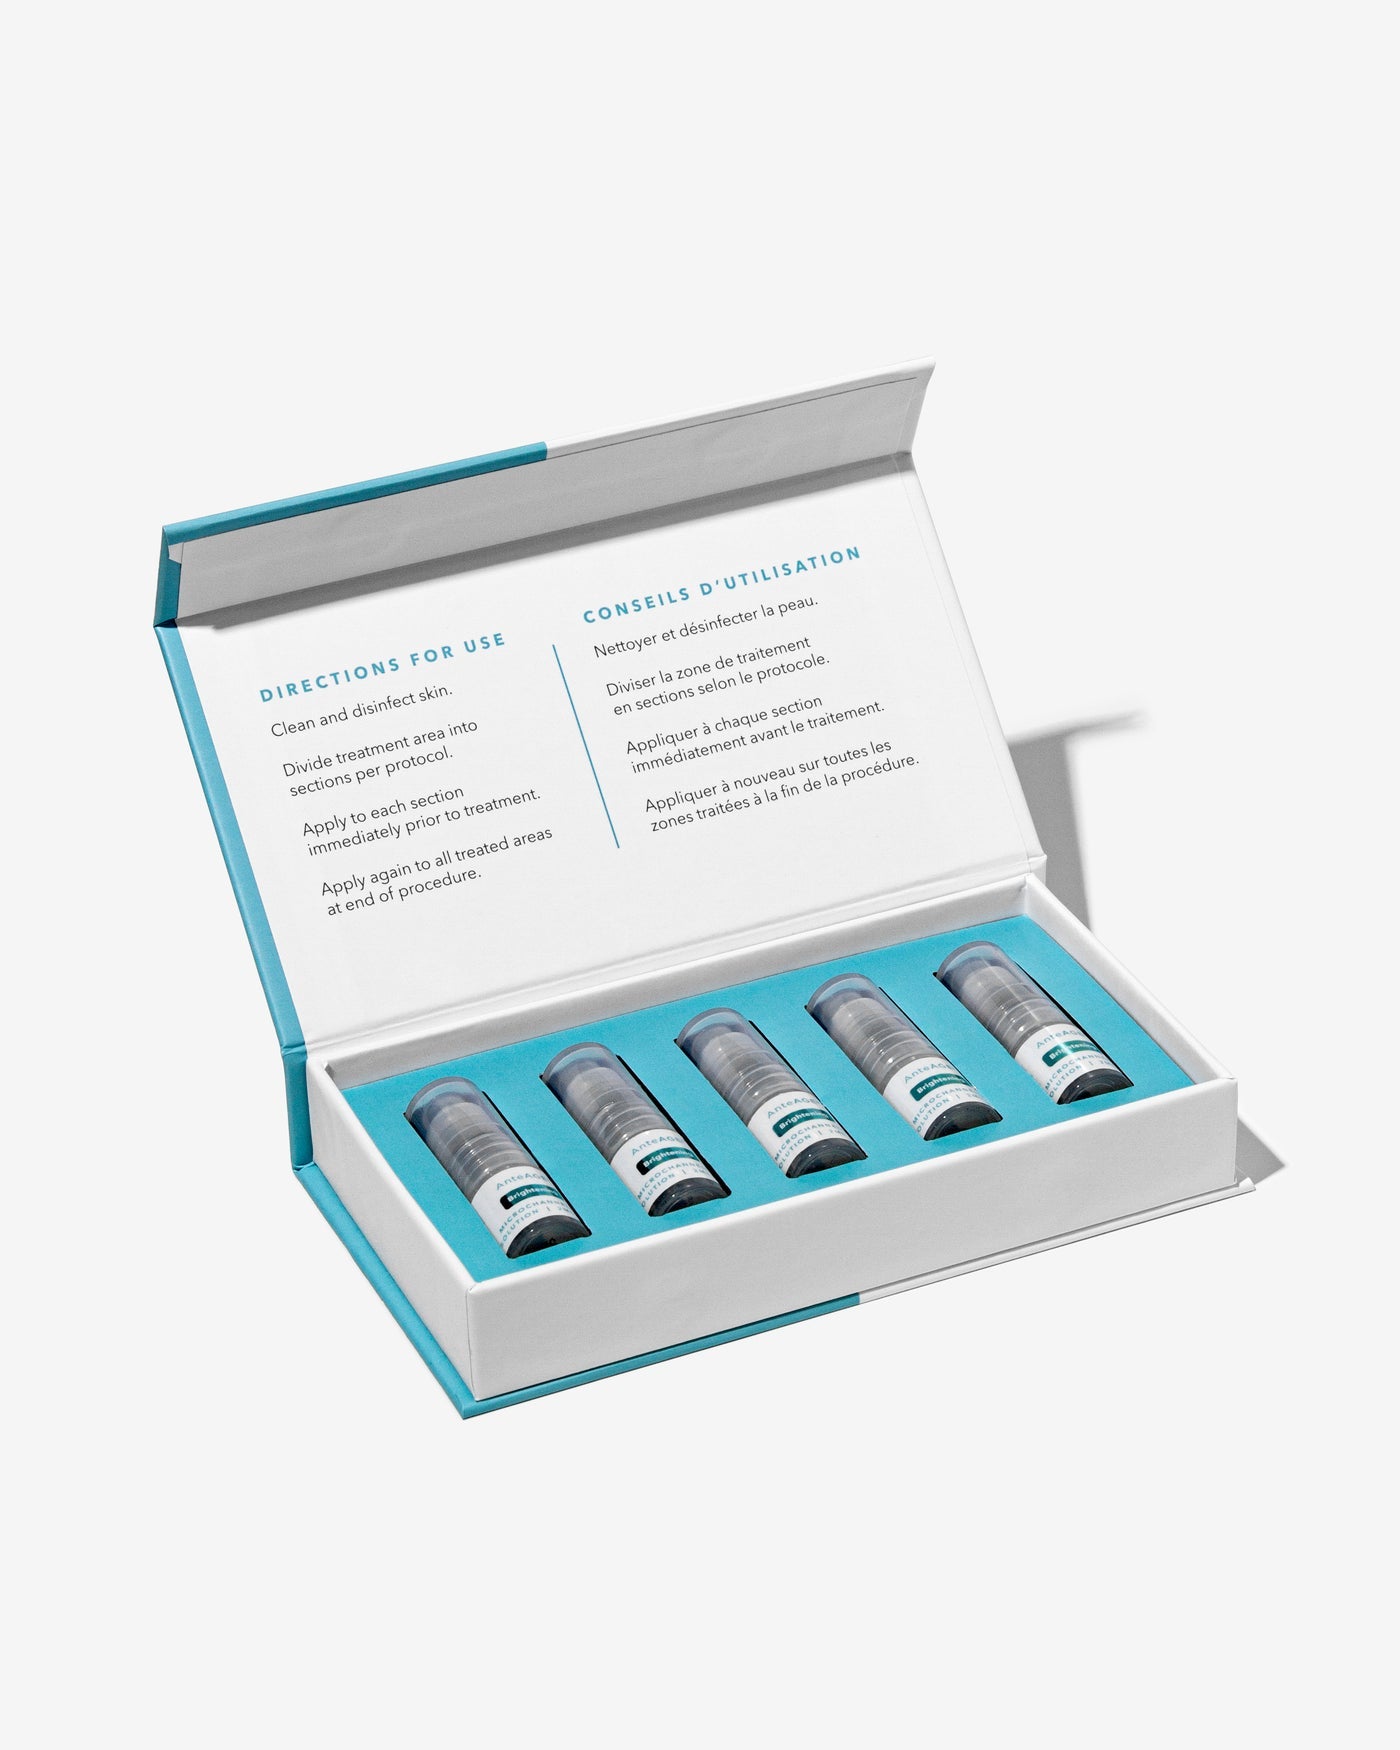 AnteAGE® Microchanneling Brightening Solution - Click to Buy!